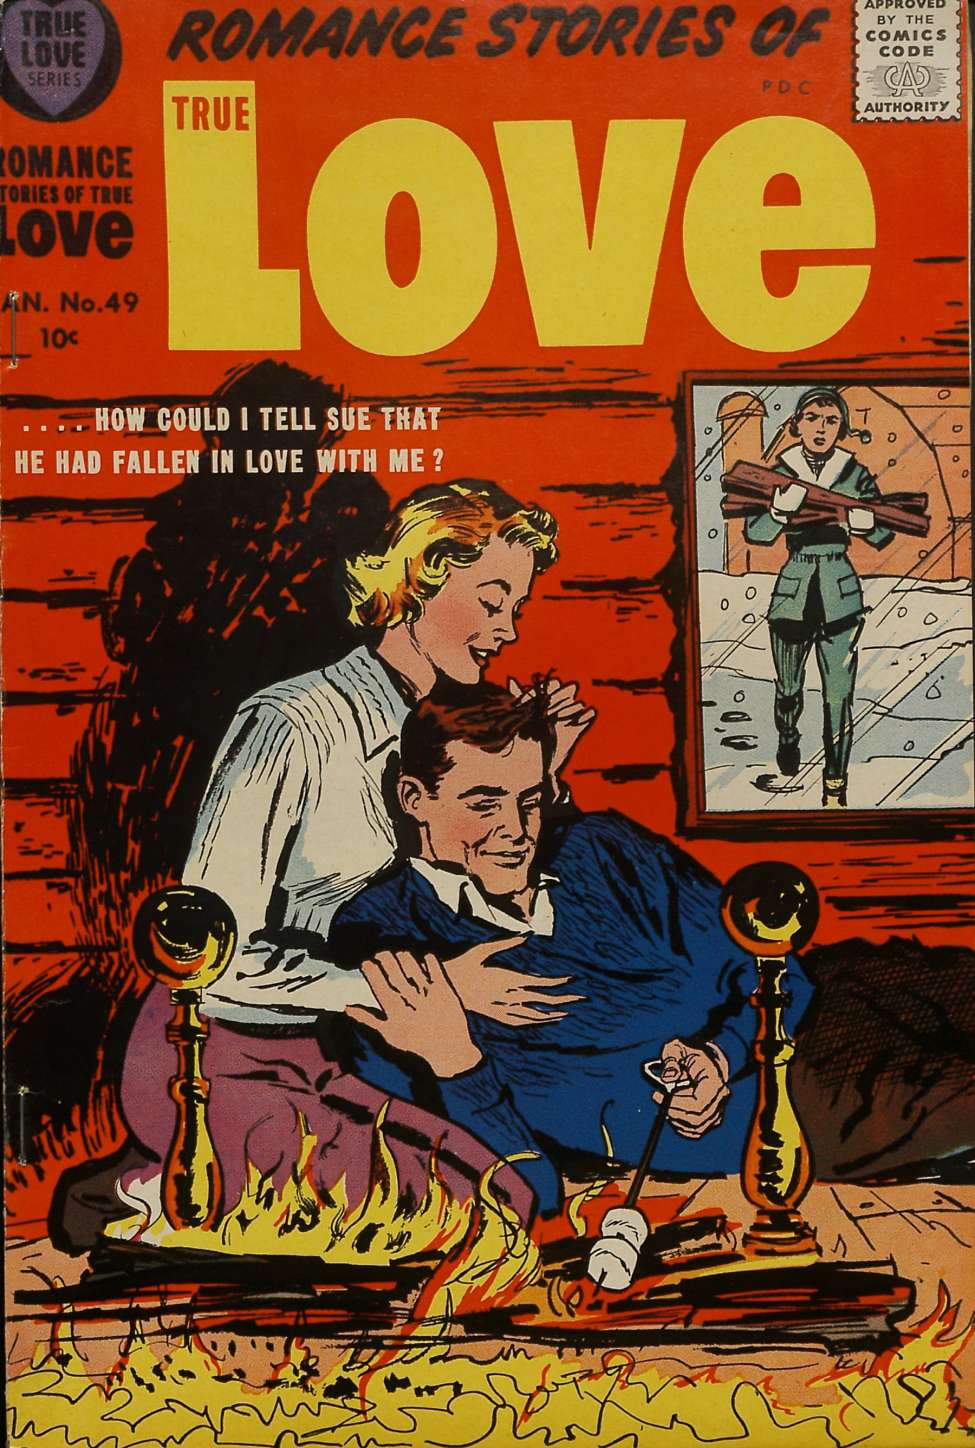 Book Cover For Romance Stories of True Love 49